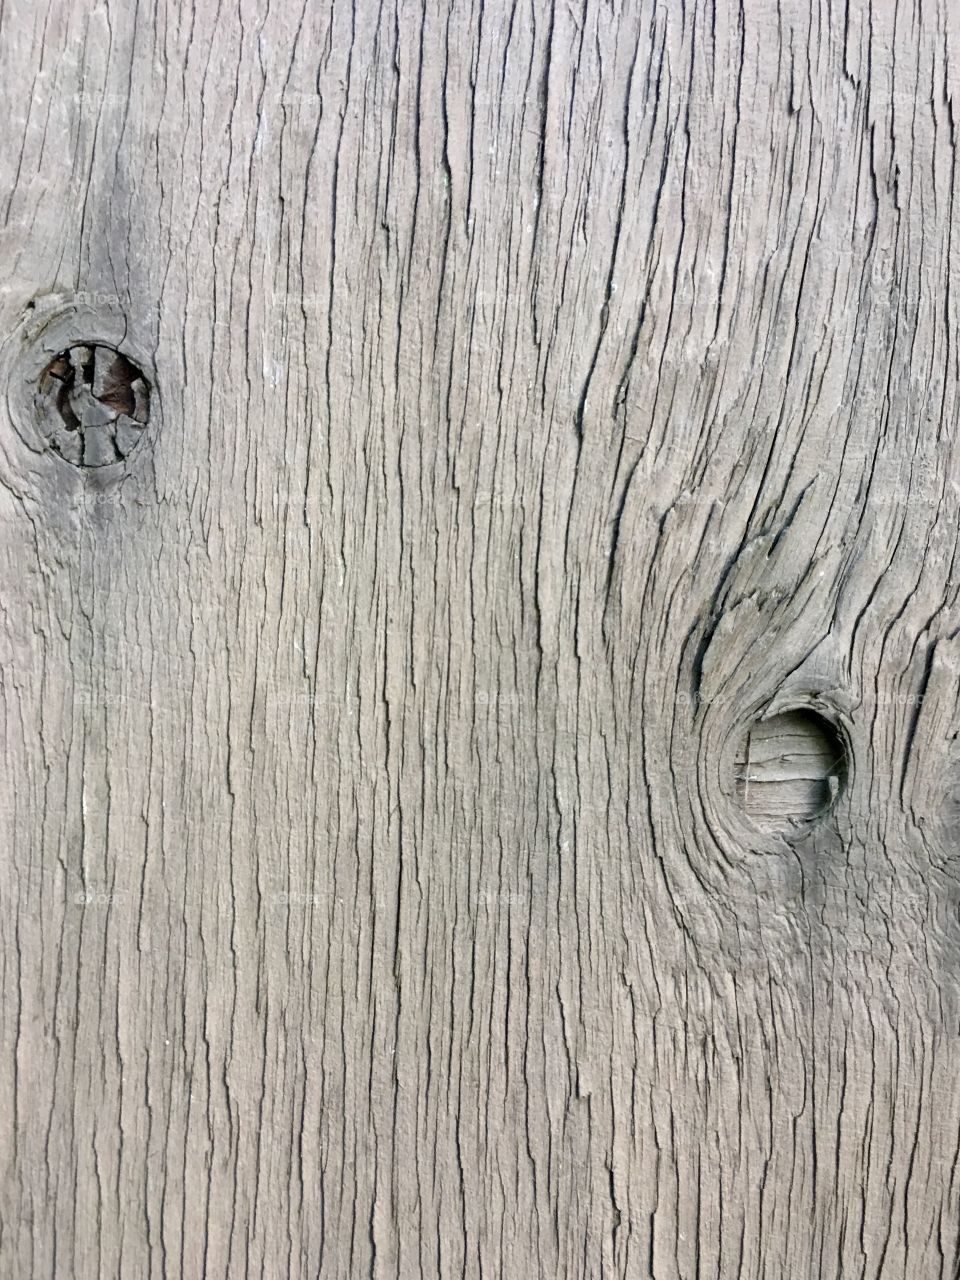 Wood texture, close up old wall